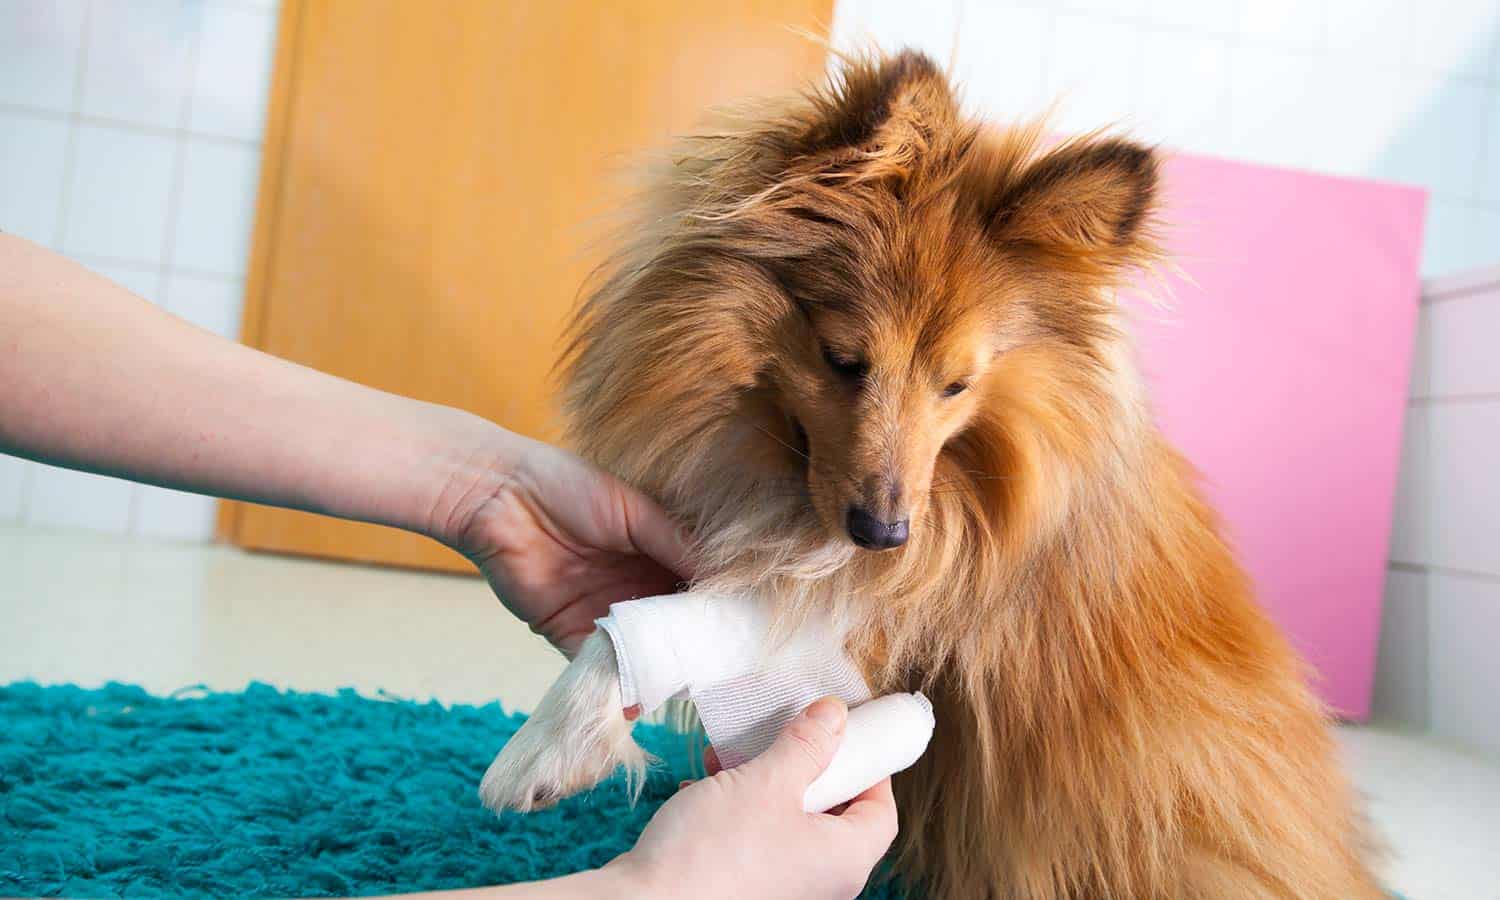 A Sheltie being treated for an injury